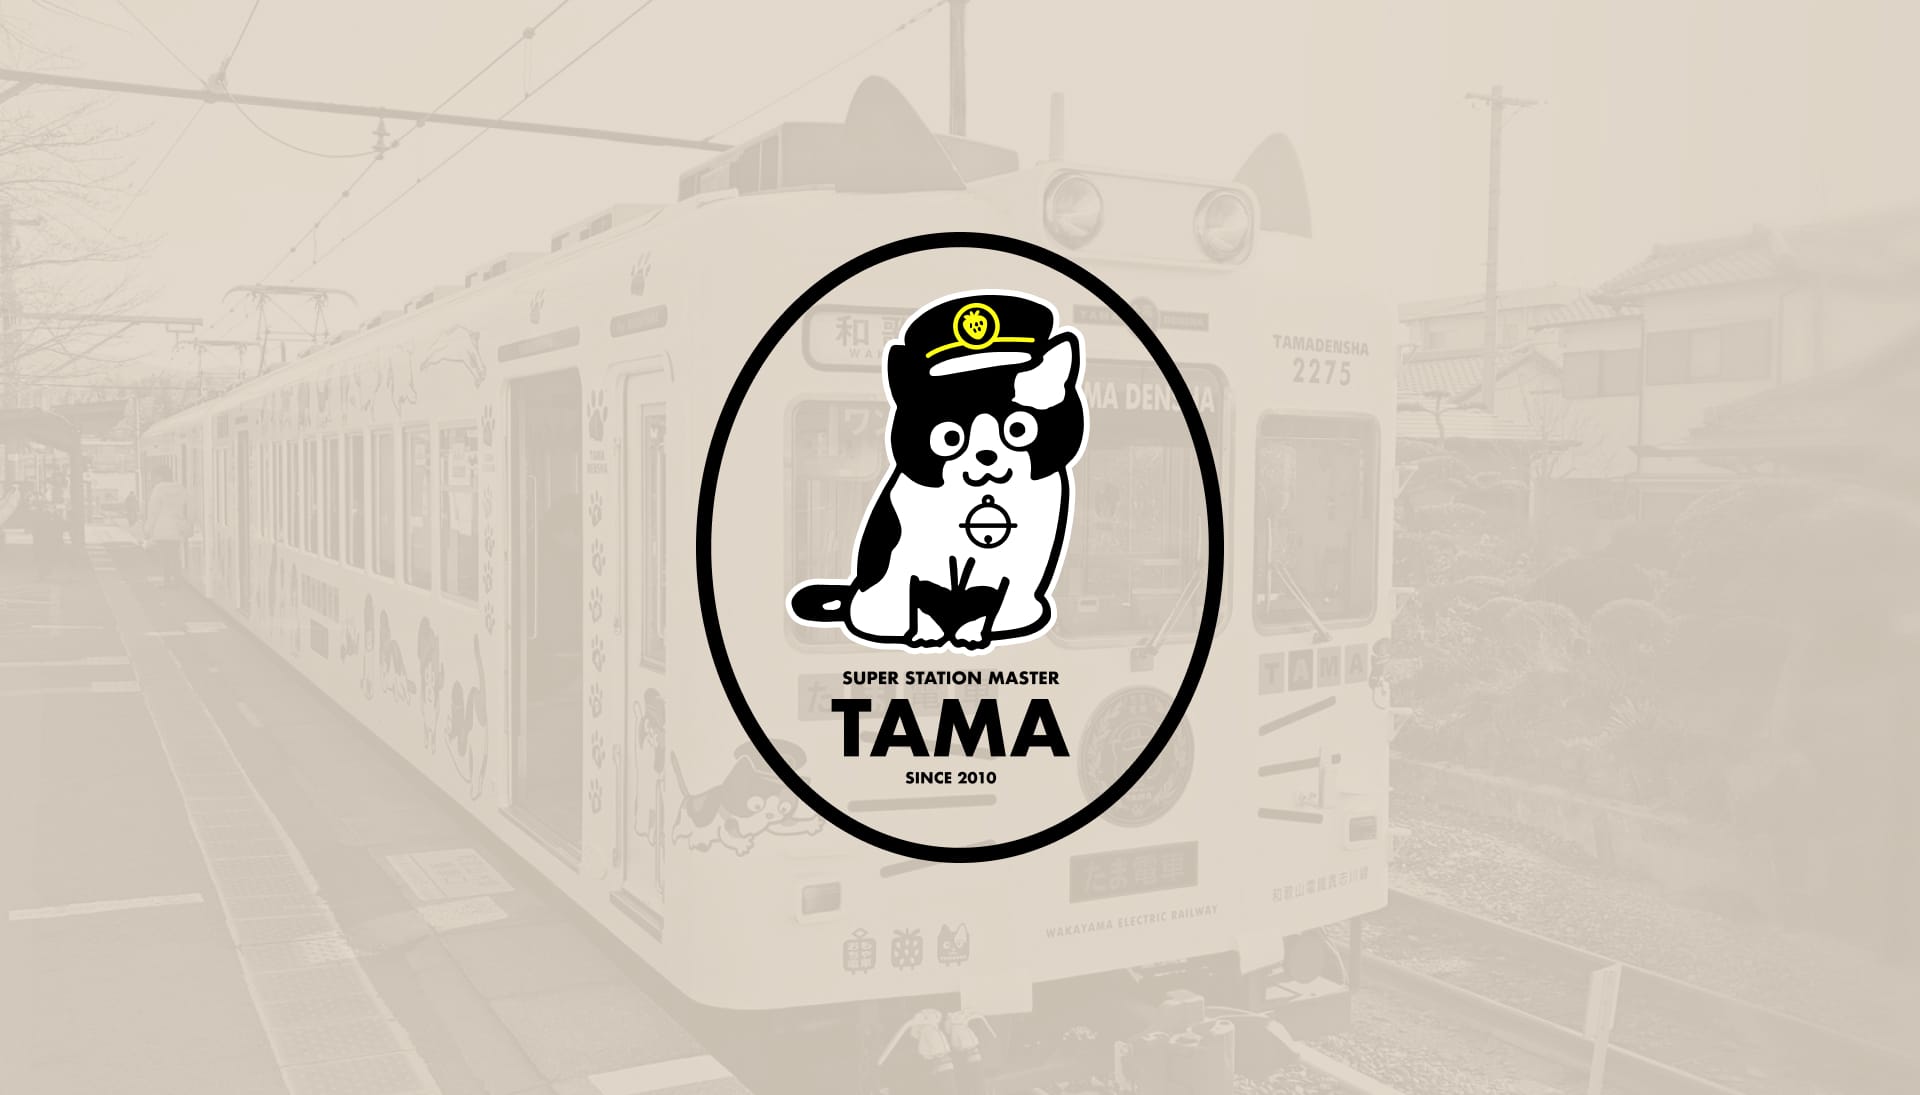 The TAMA Station Master logo overlayed on an image of a train at the Tama train station platform.